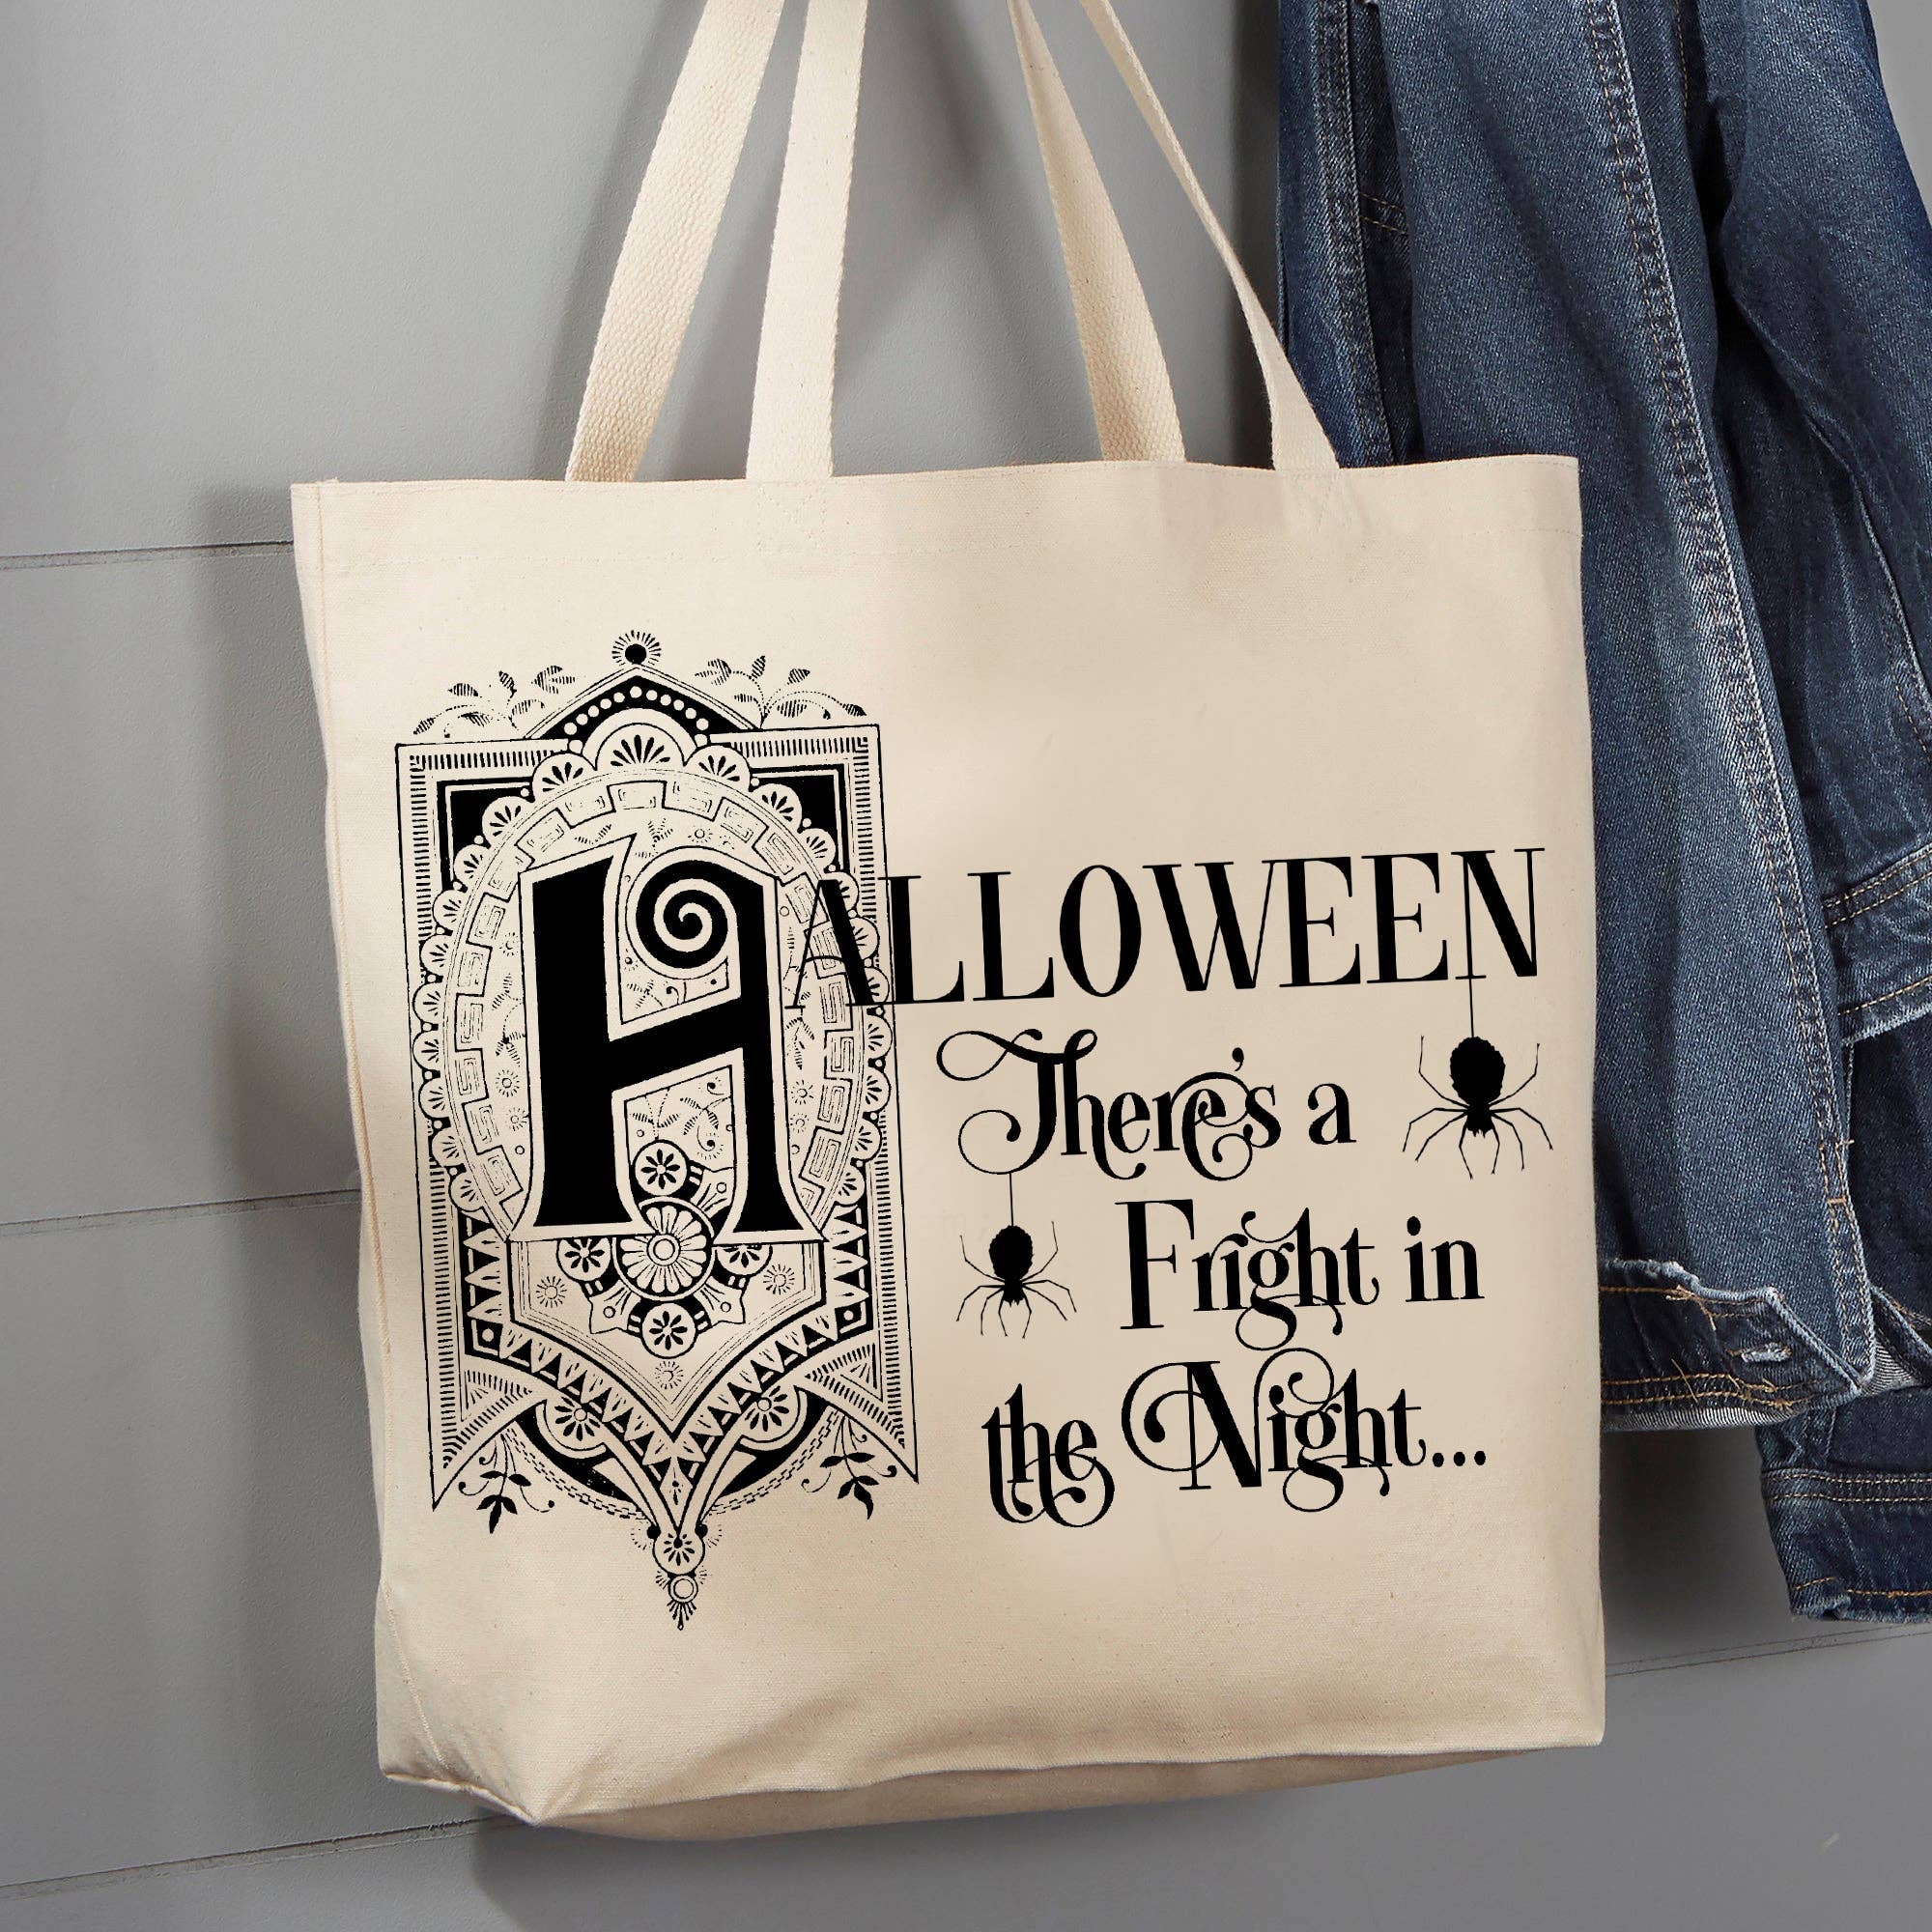 Halloween There's a Fright in the Night, 12 oz  Tote Bag